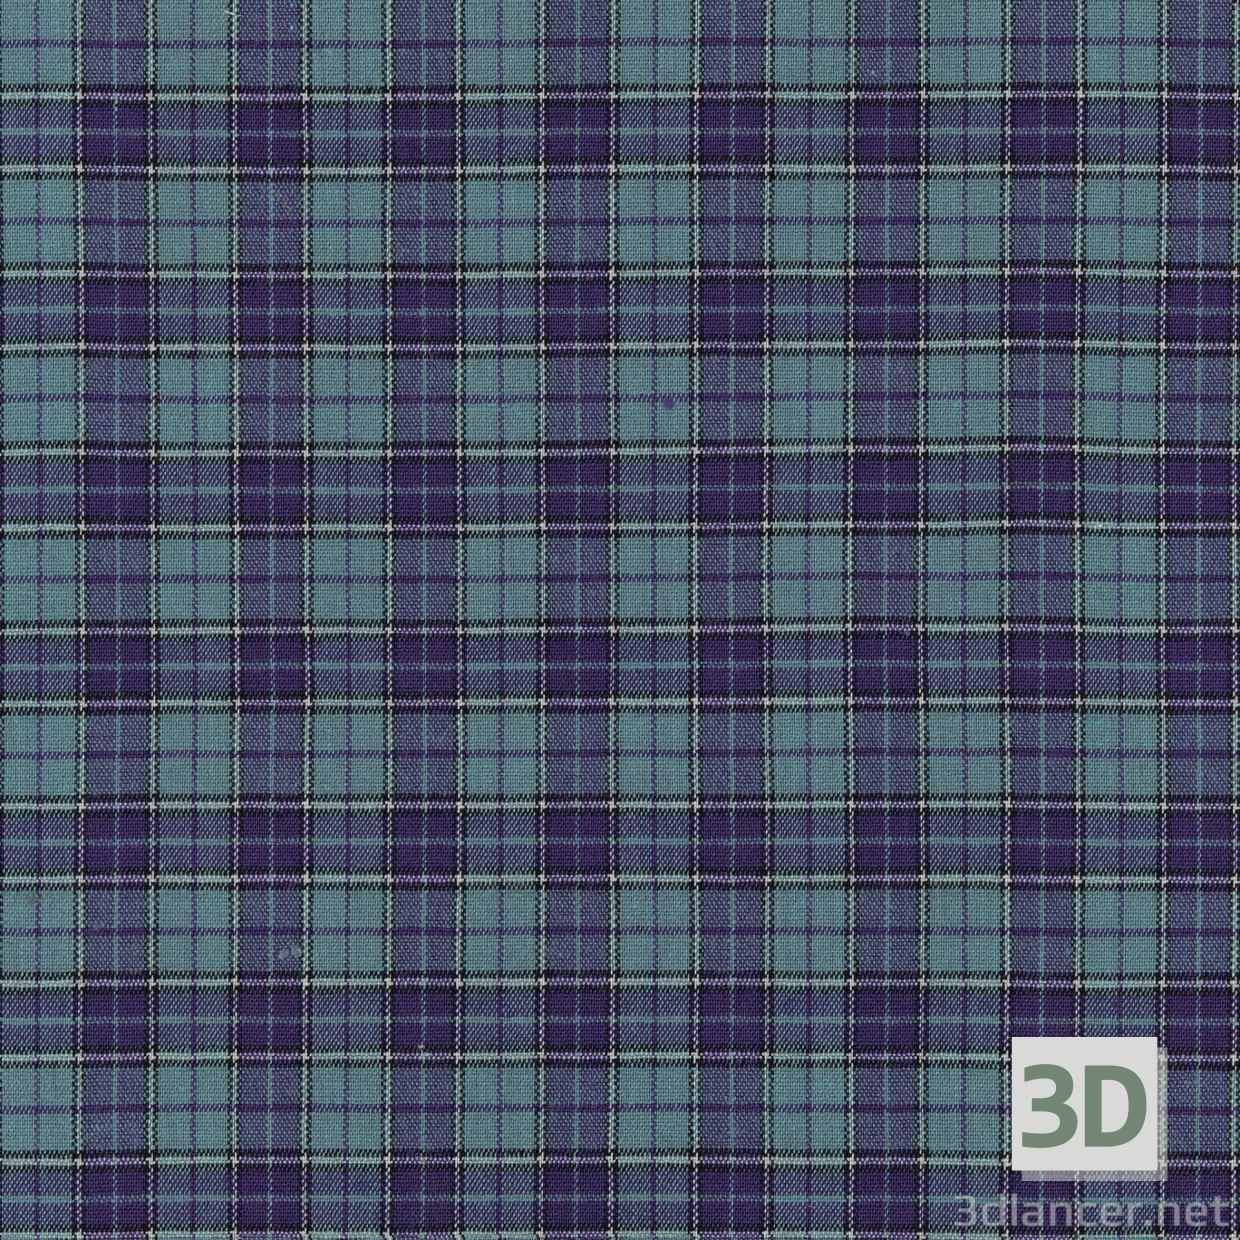 Texture plaid 03 free download - image